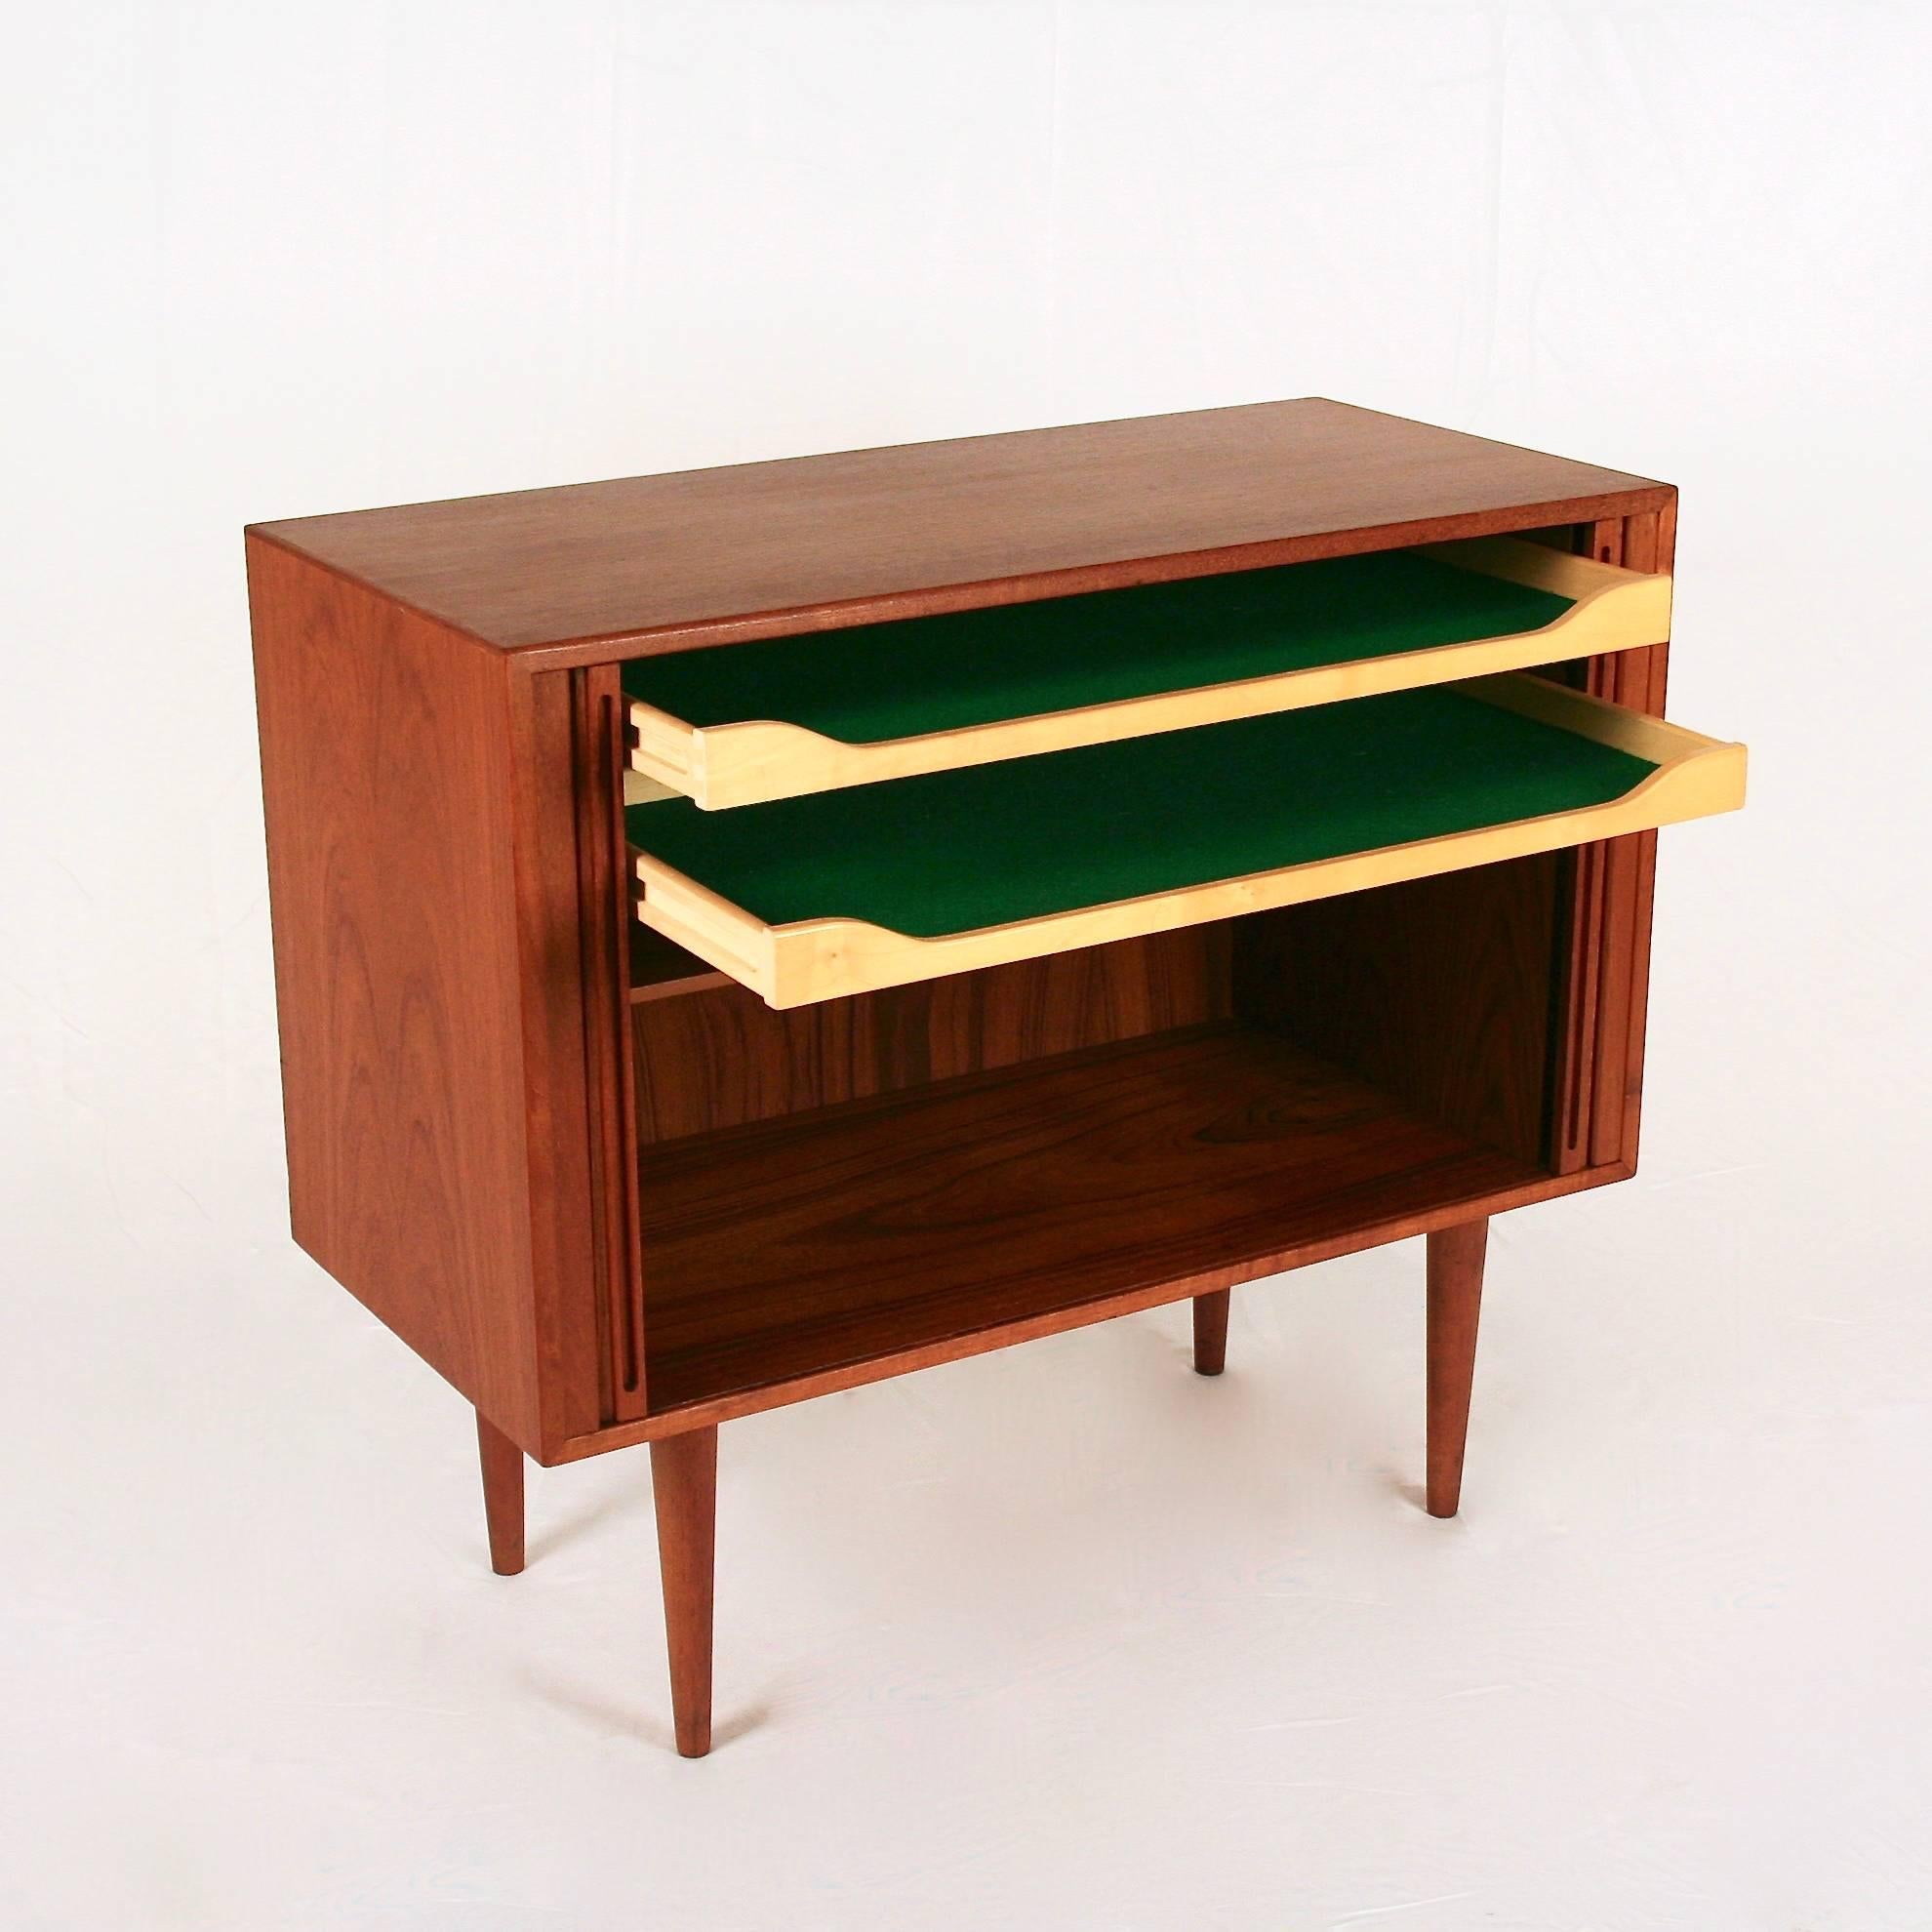 Vintage Danish Kai Kristiansen Teak Cabinet with Tambour Doors In Excellent Condition For Sale In Vancouver, BC